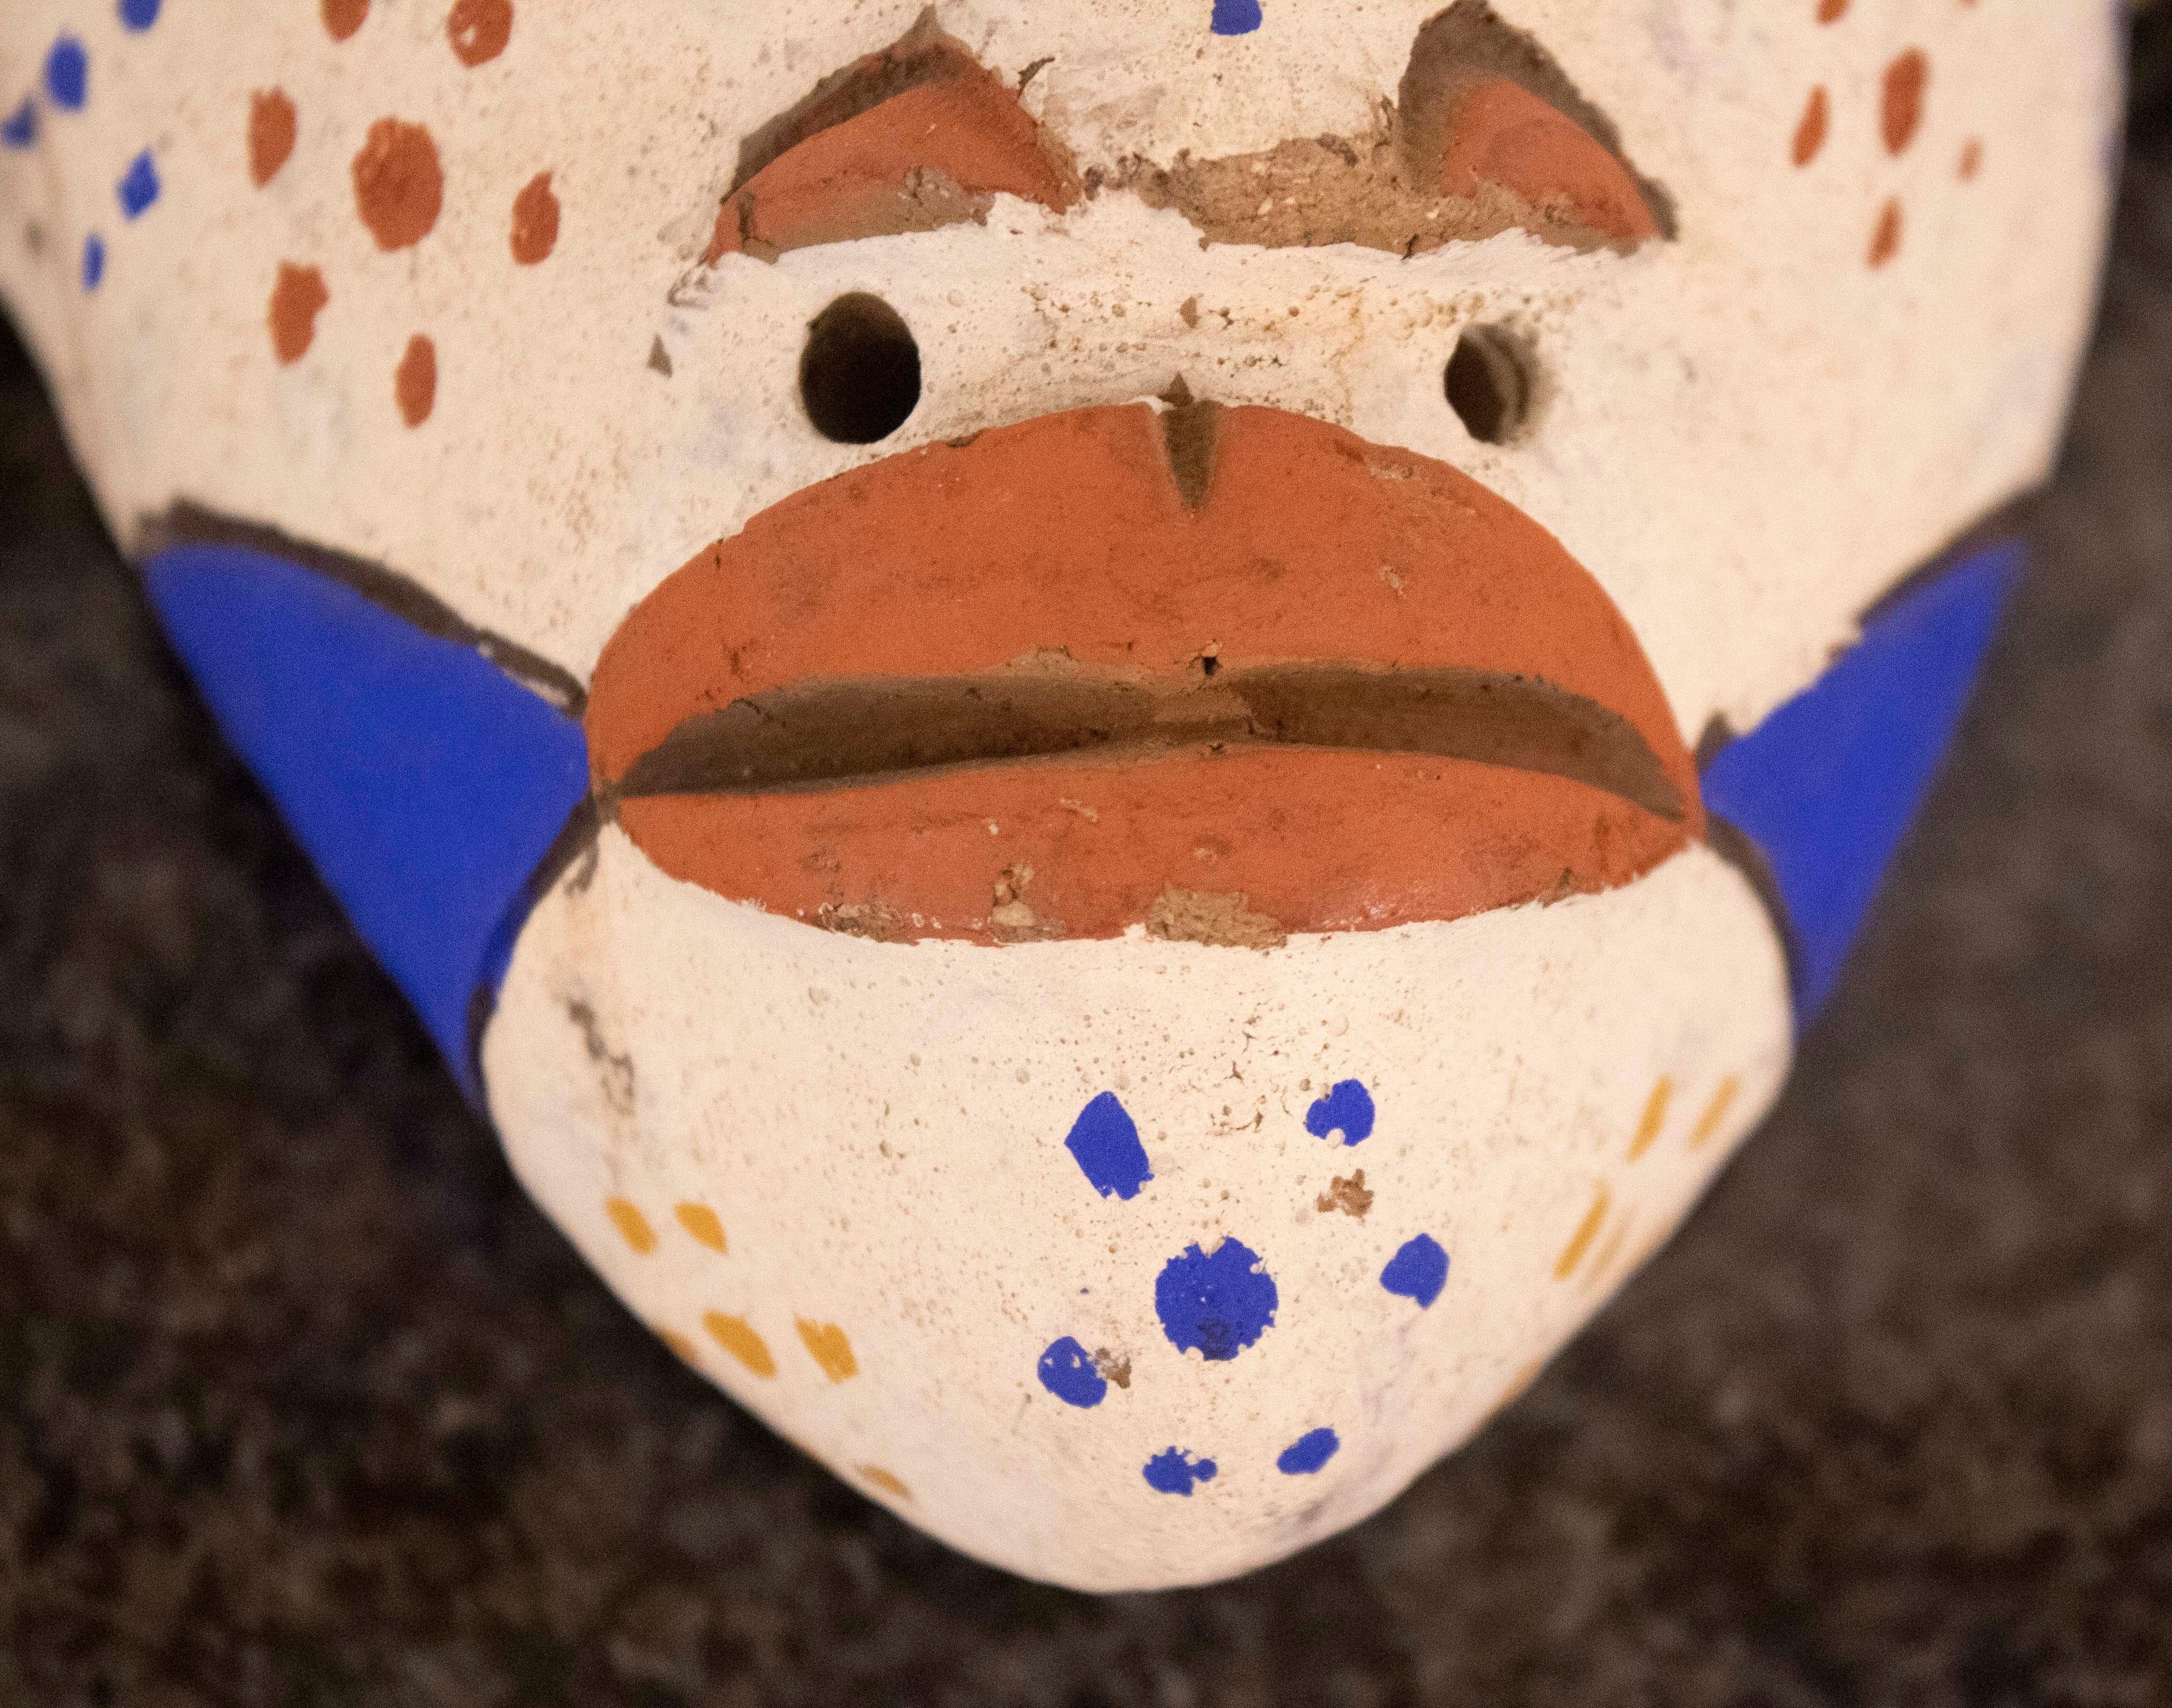 African Polychrome White Wall Sculpture with Orange Lips Mask Antique In Good Condition For Sale In Keego Harbor, MI